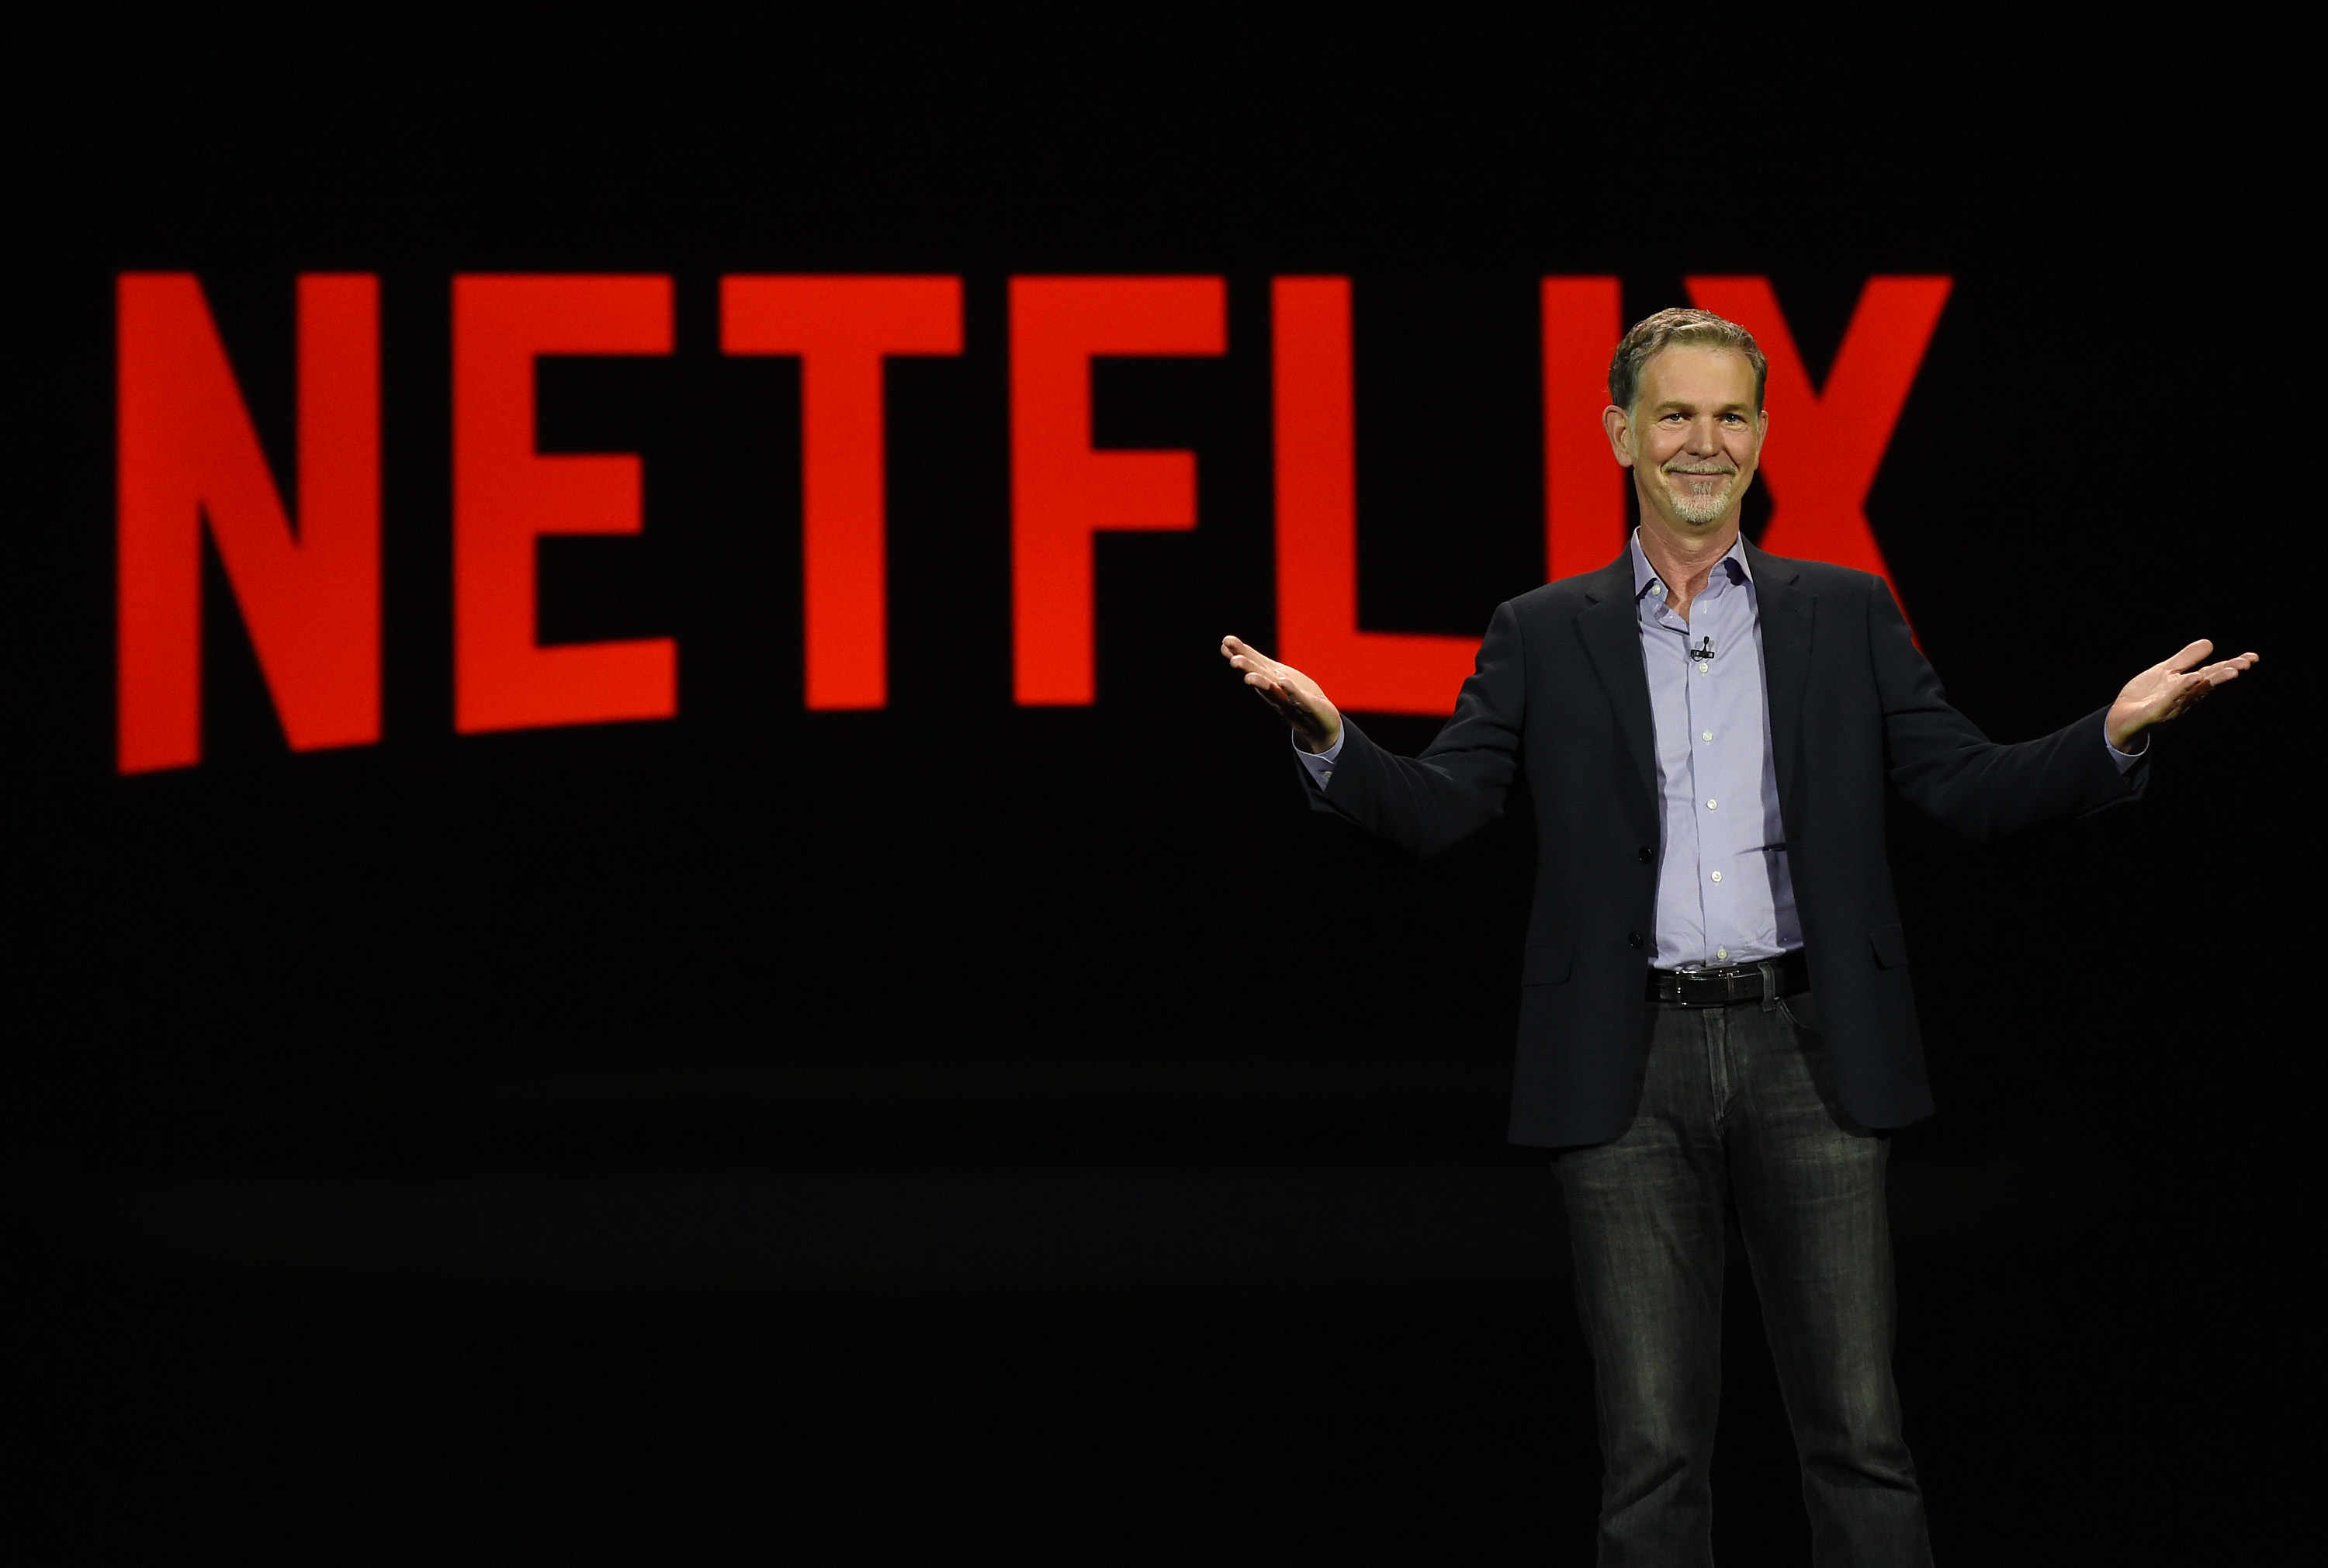 Netflix is now worth more than $100B